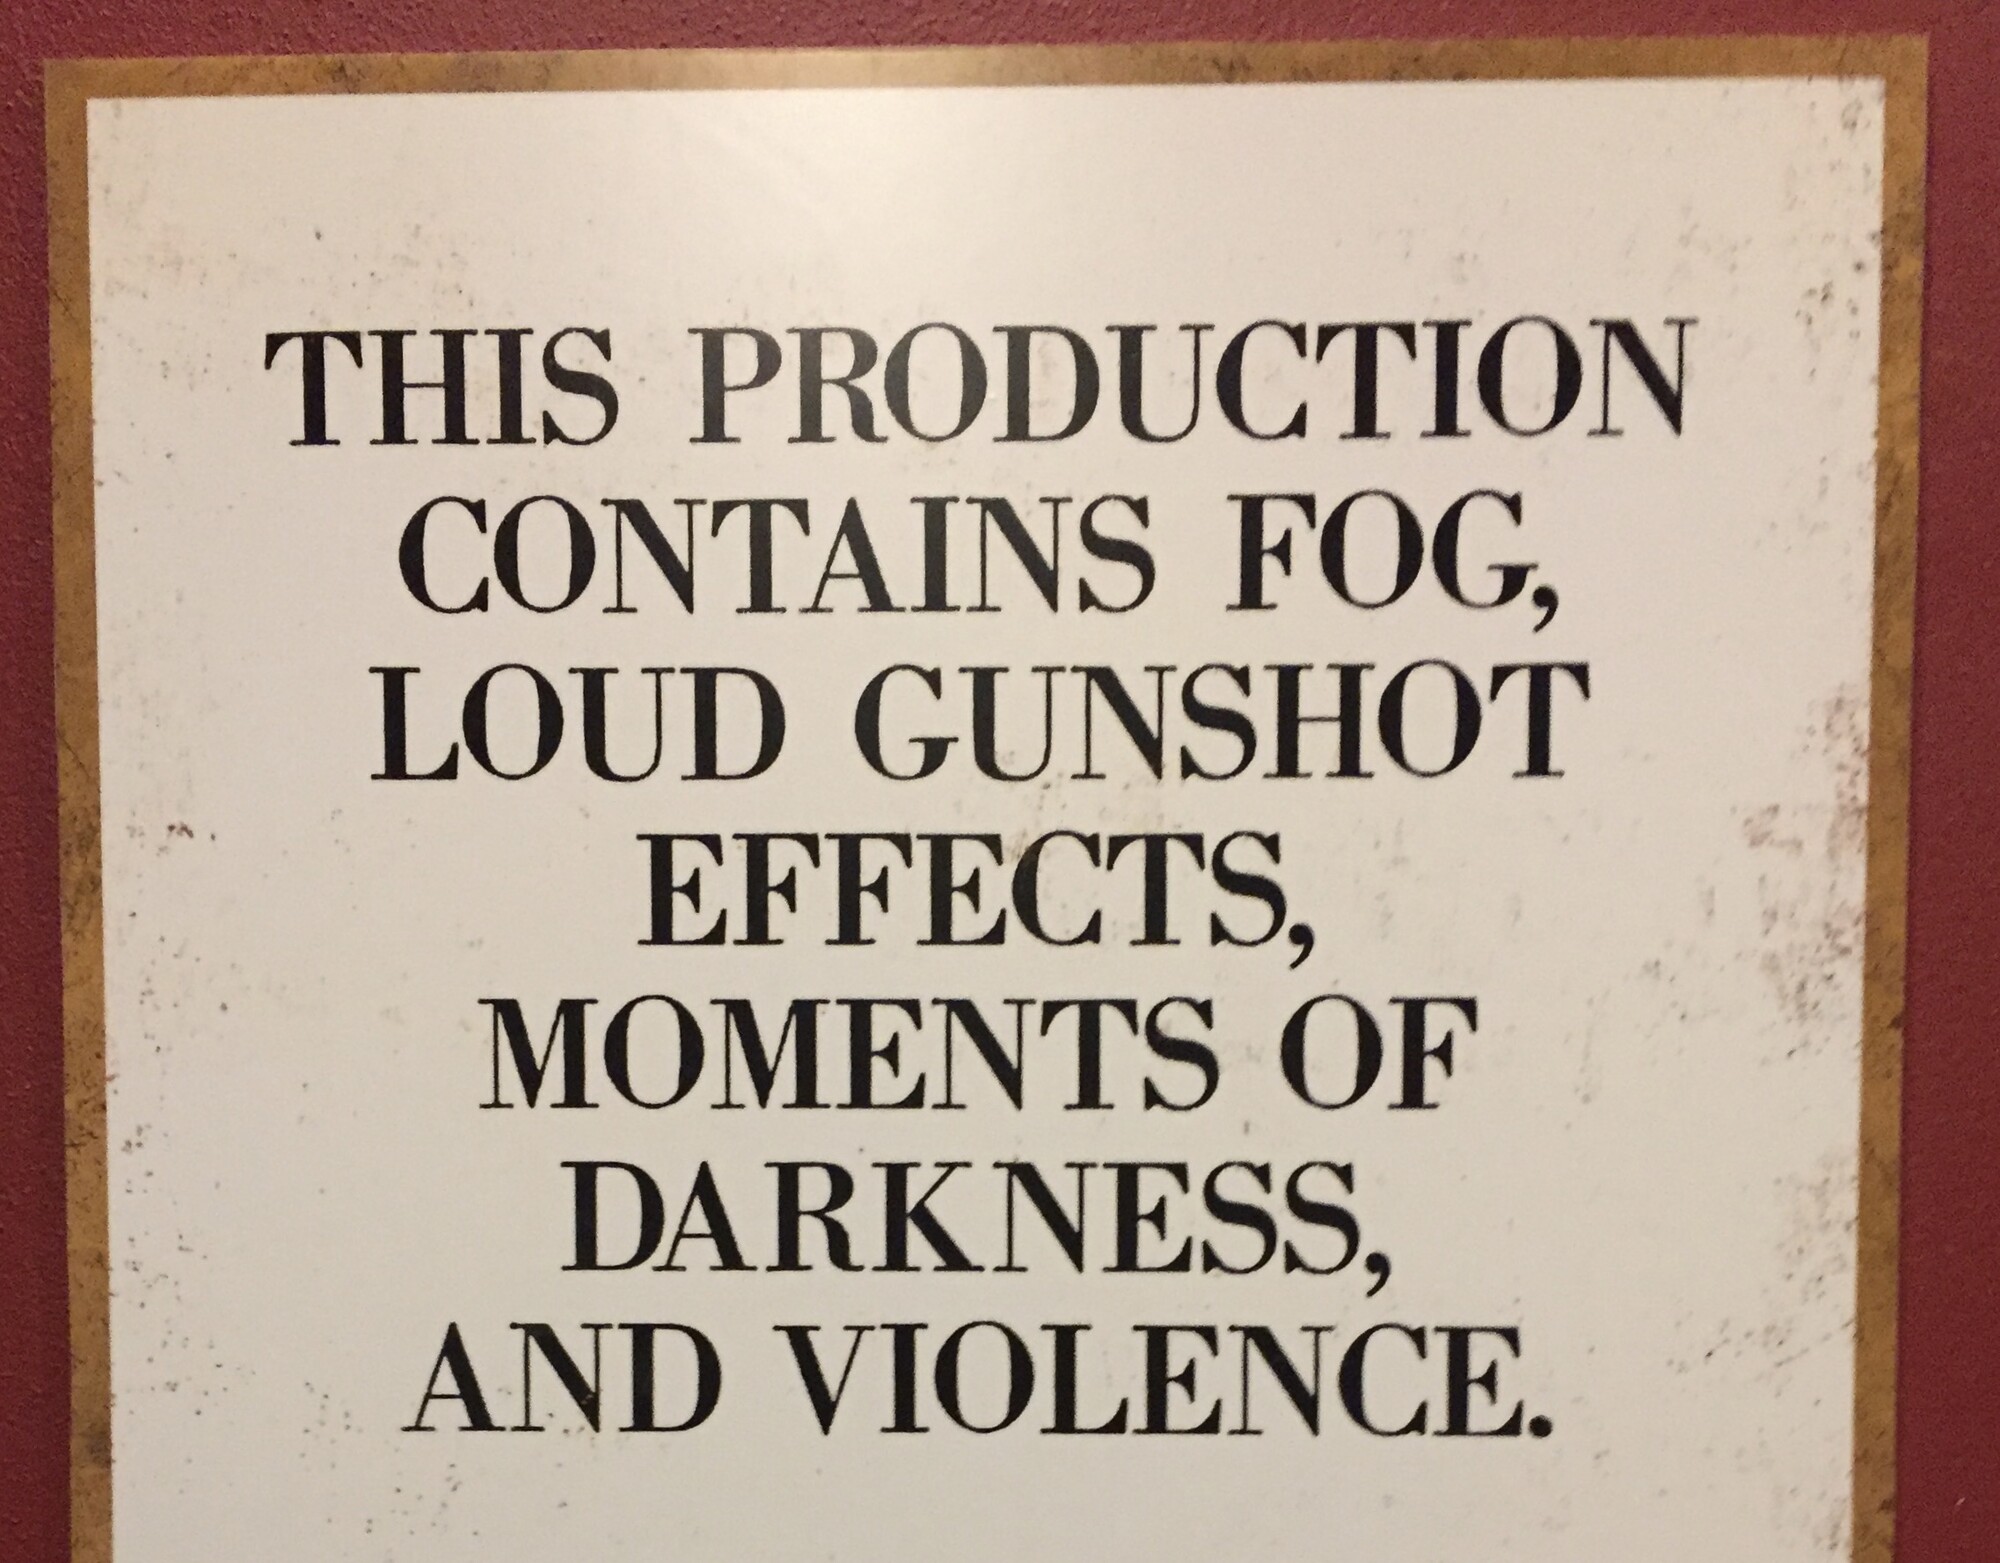 This production contains fog, loud gunshot effects, moments of darkness, and violence.